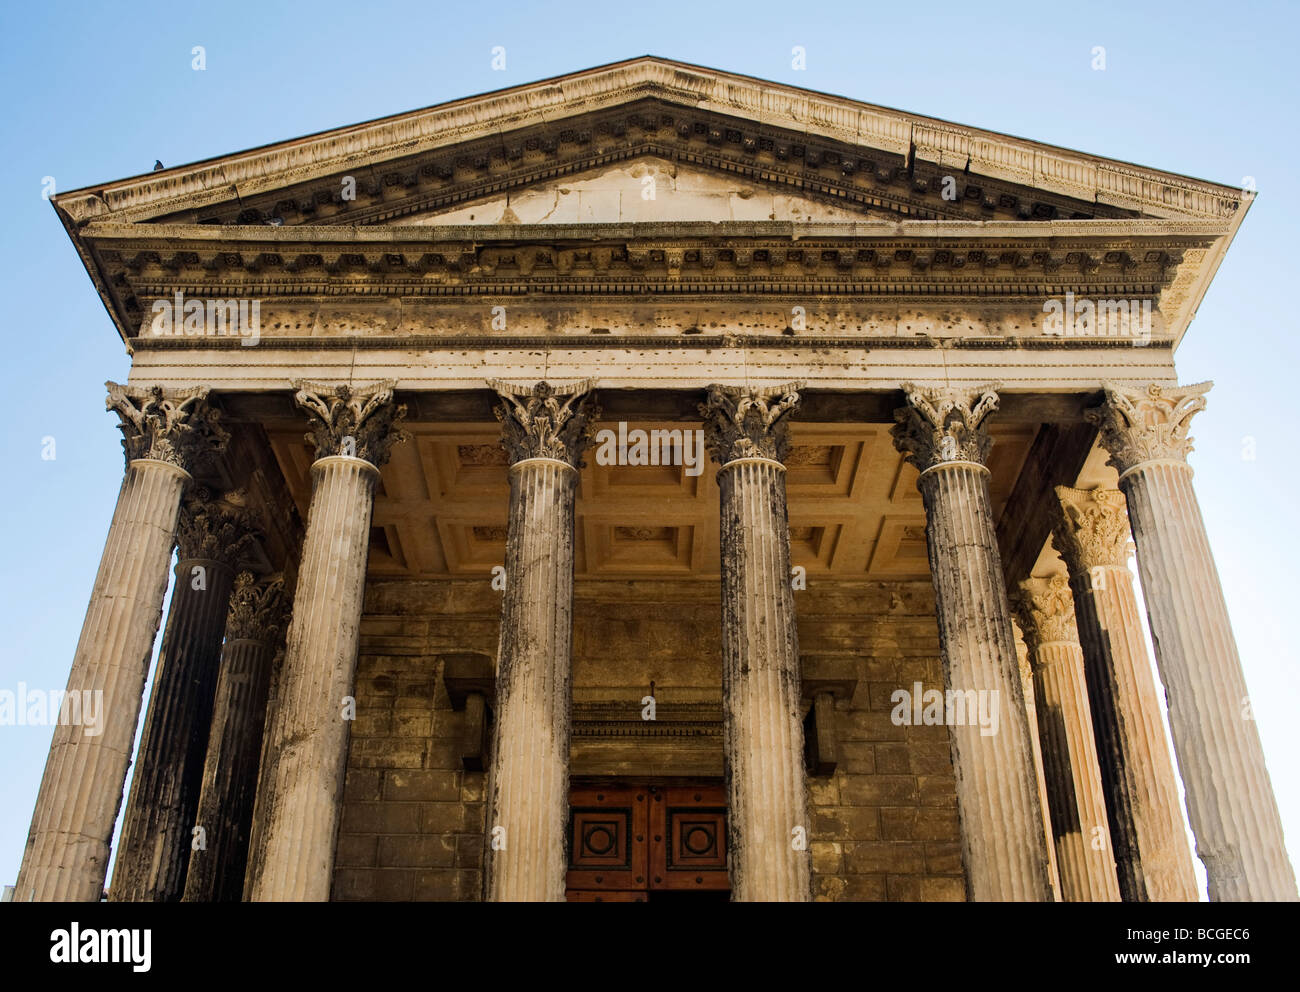 Maison Carree, an ancient Roman temple, in Nimes, France Stock Photo